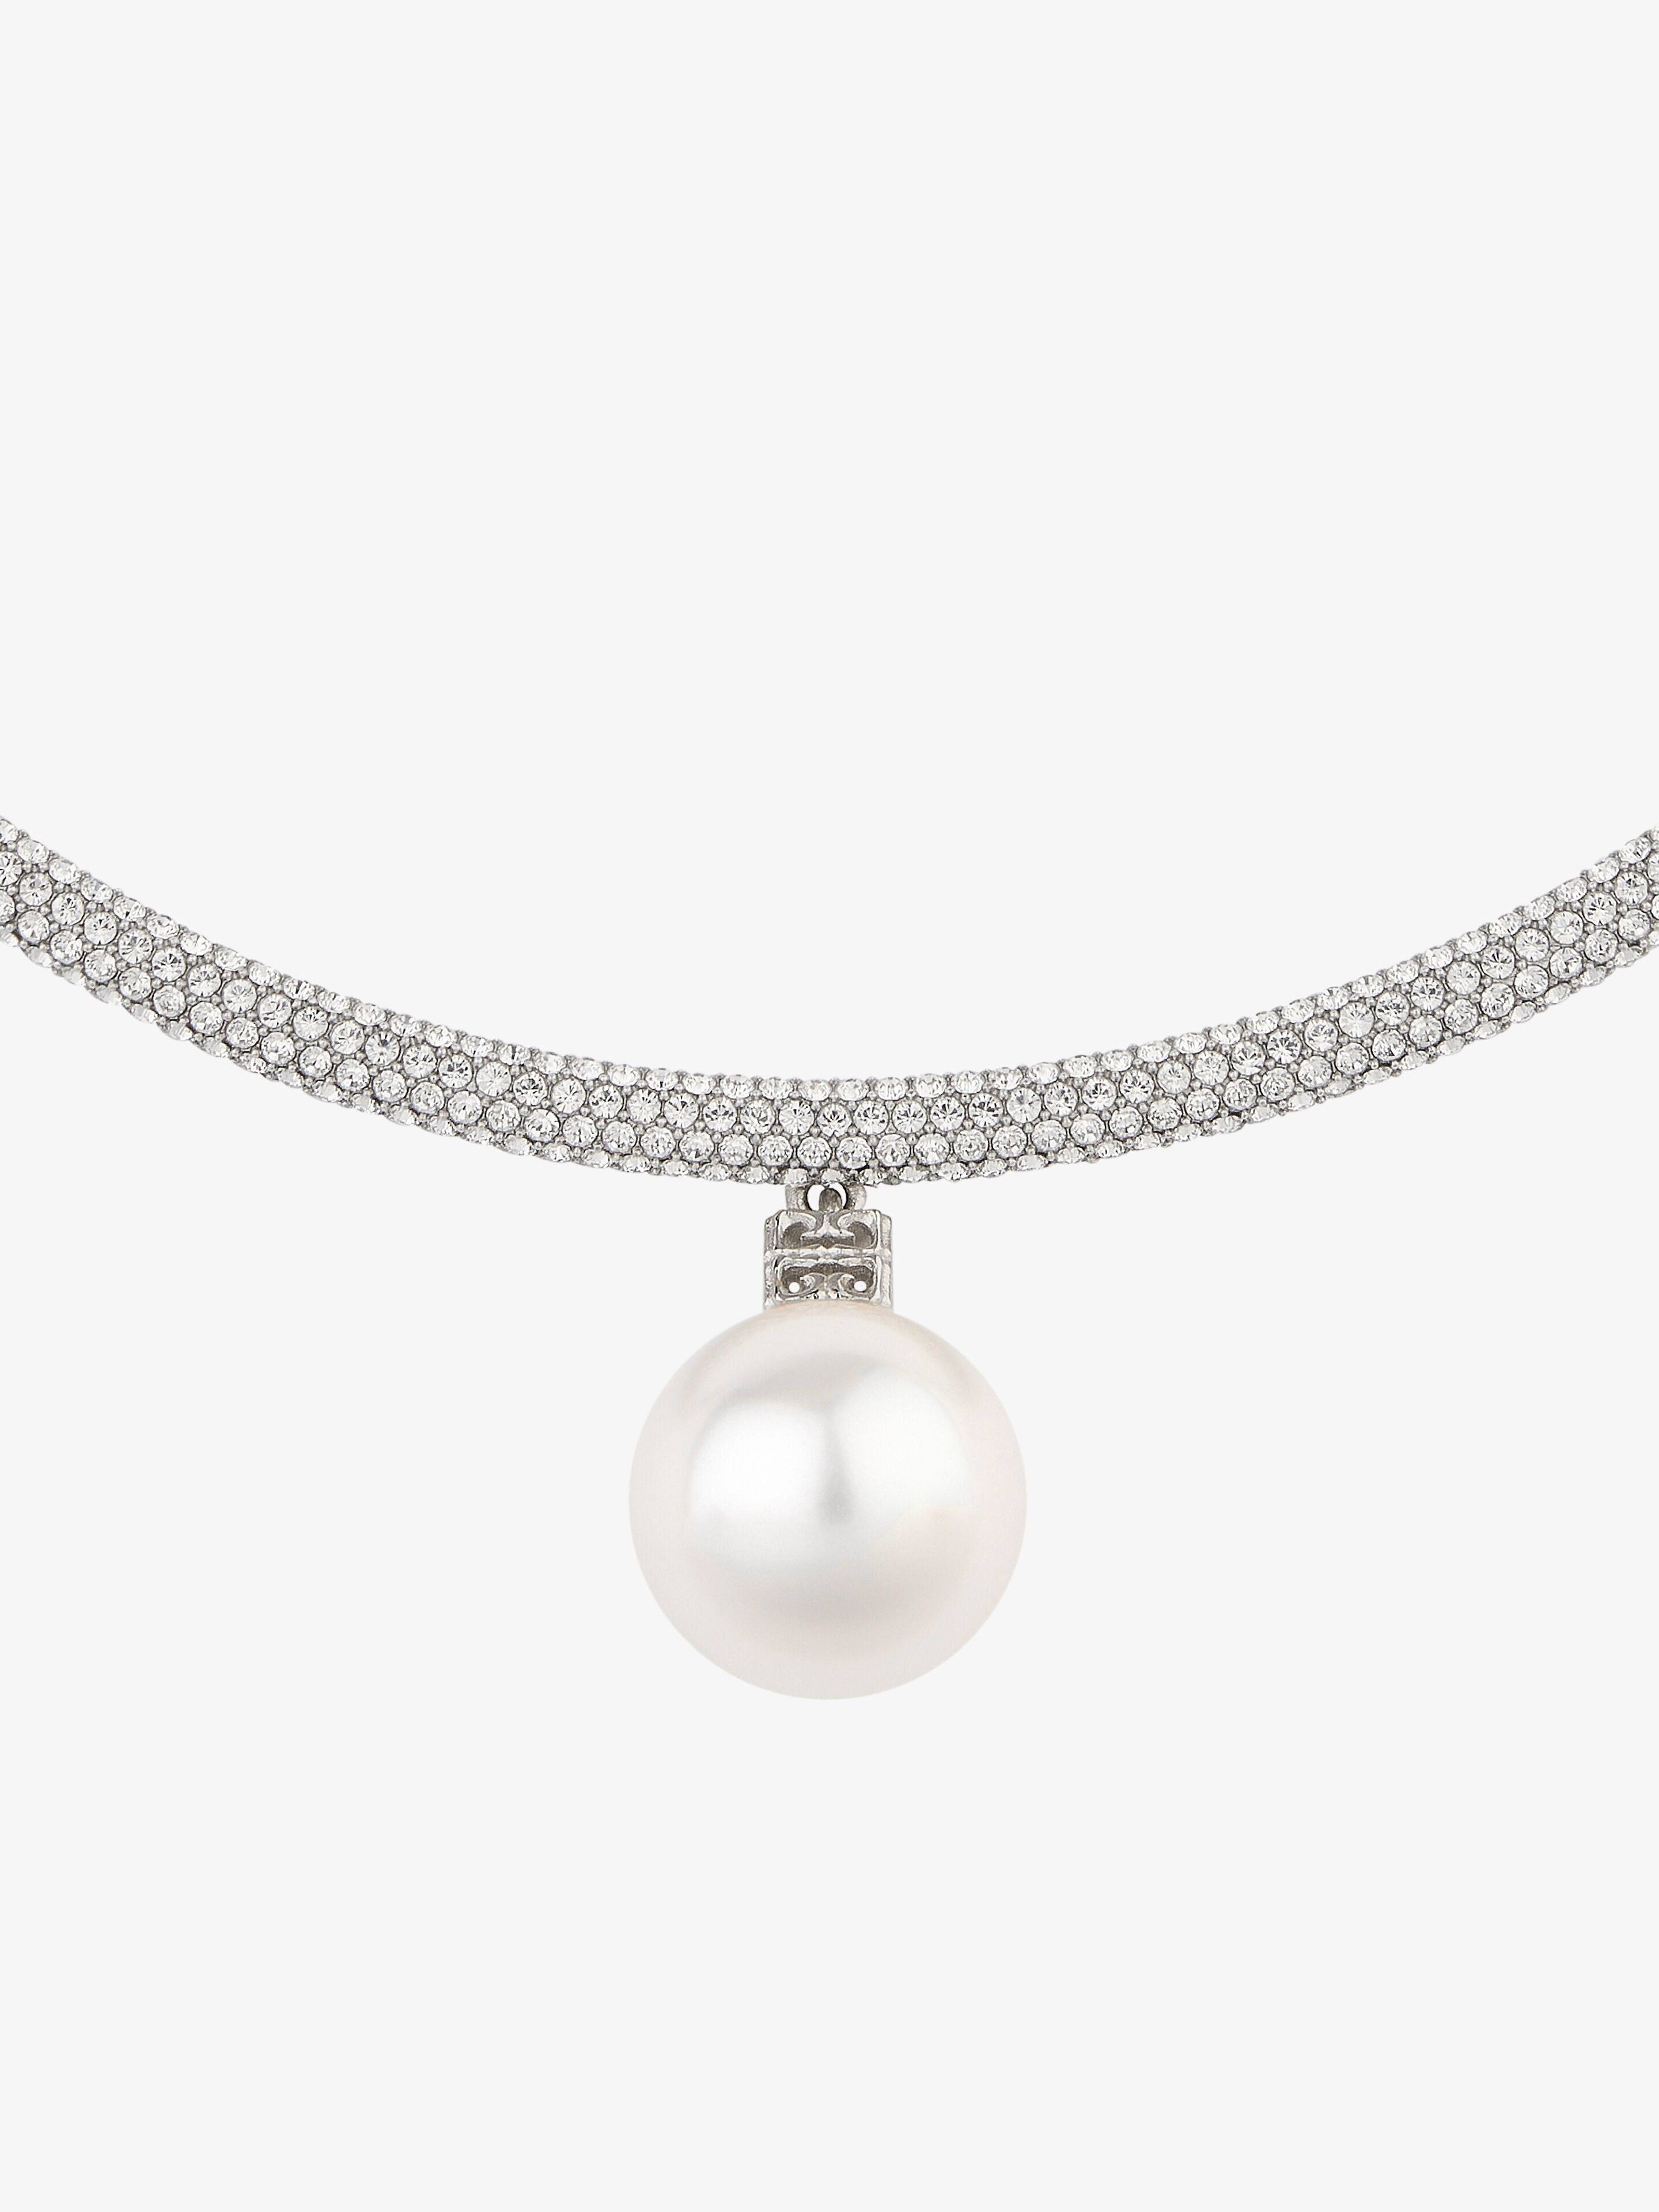 PEARL TORQUE NECKLACE IN METAL WITH PEARL AND CRYSTALS - 2